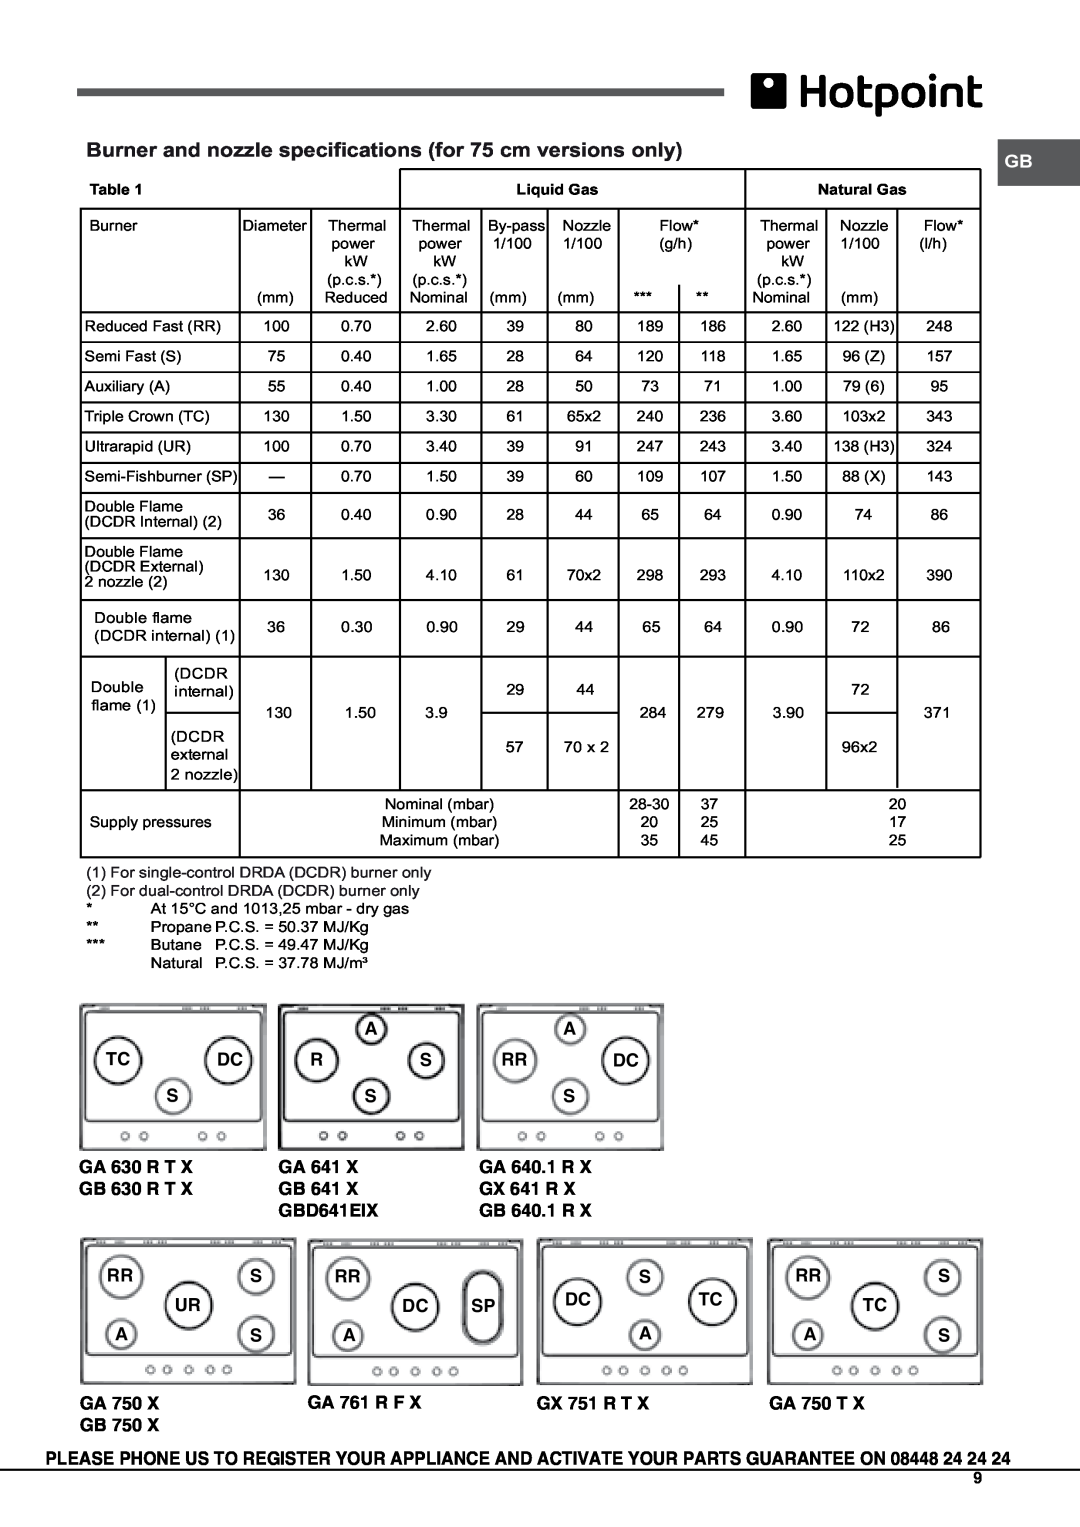 Hotpoint GA750TX, GB630RTX, GB750X, GB641X Burner and nozzle specifications for 75 cm versions only, Liquid Gas, Natural Gas 